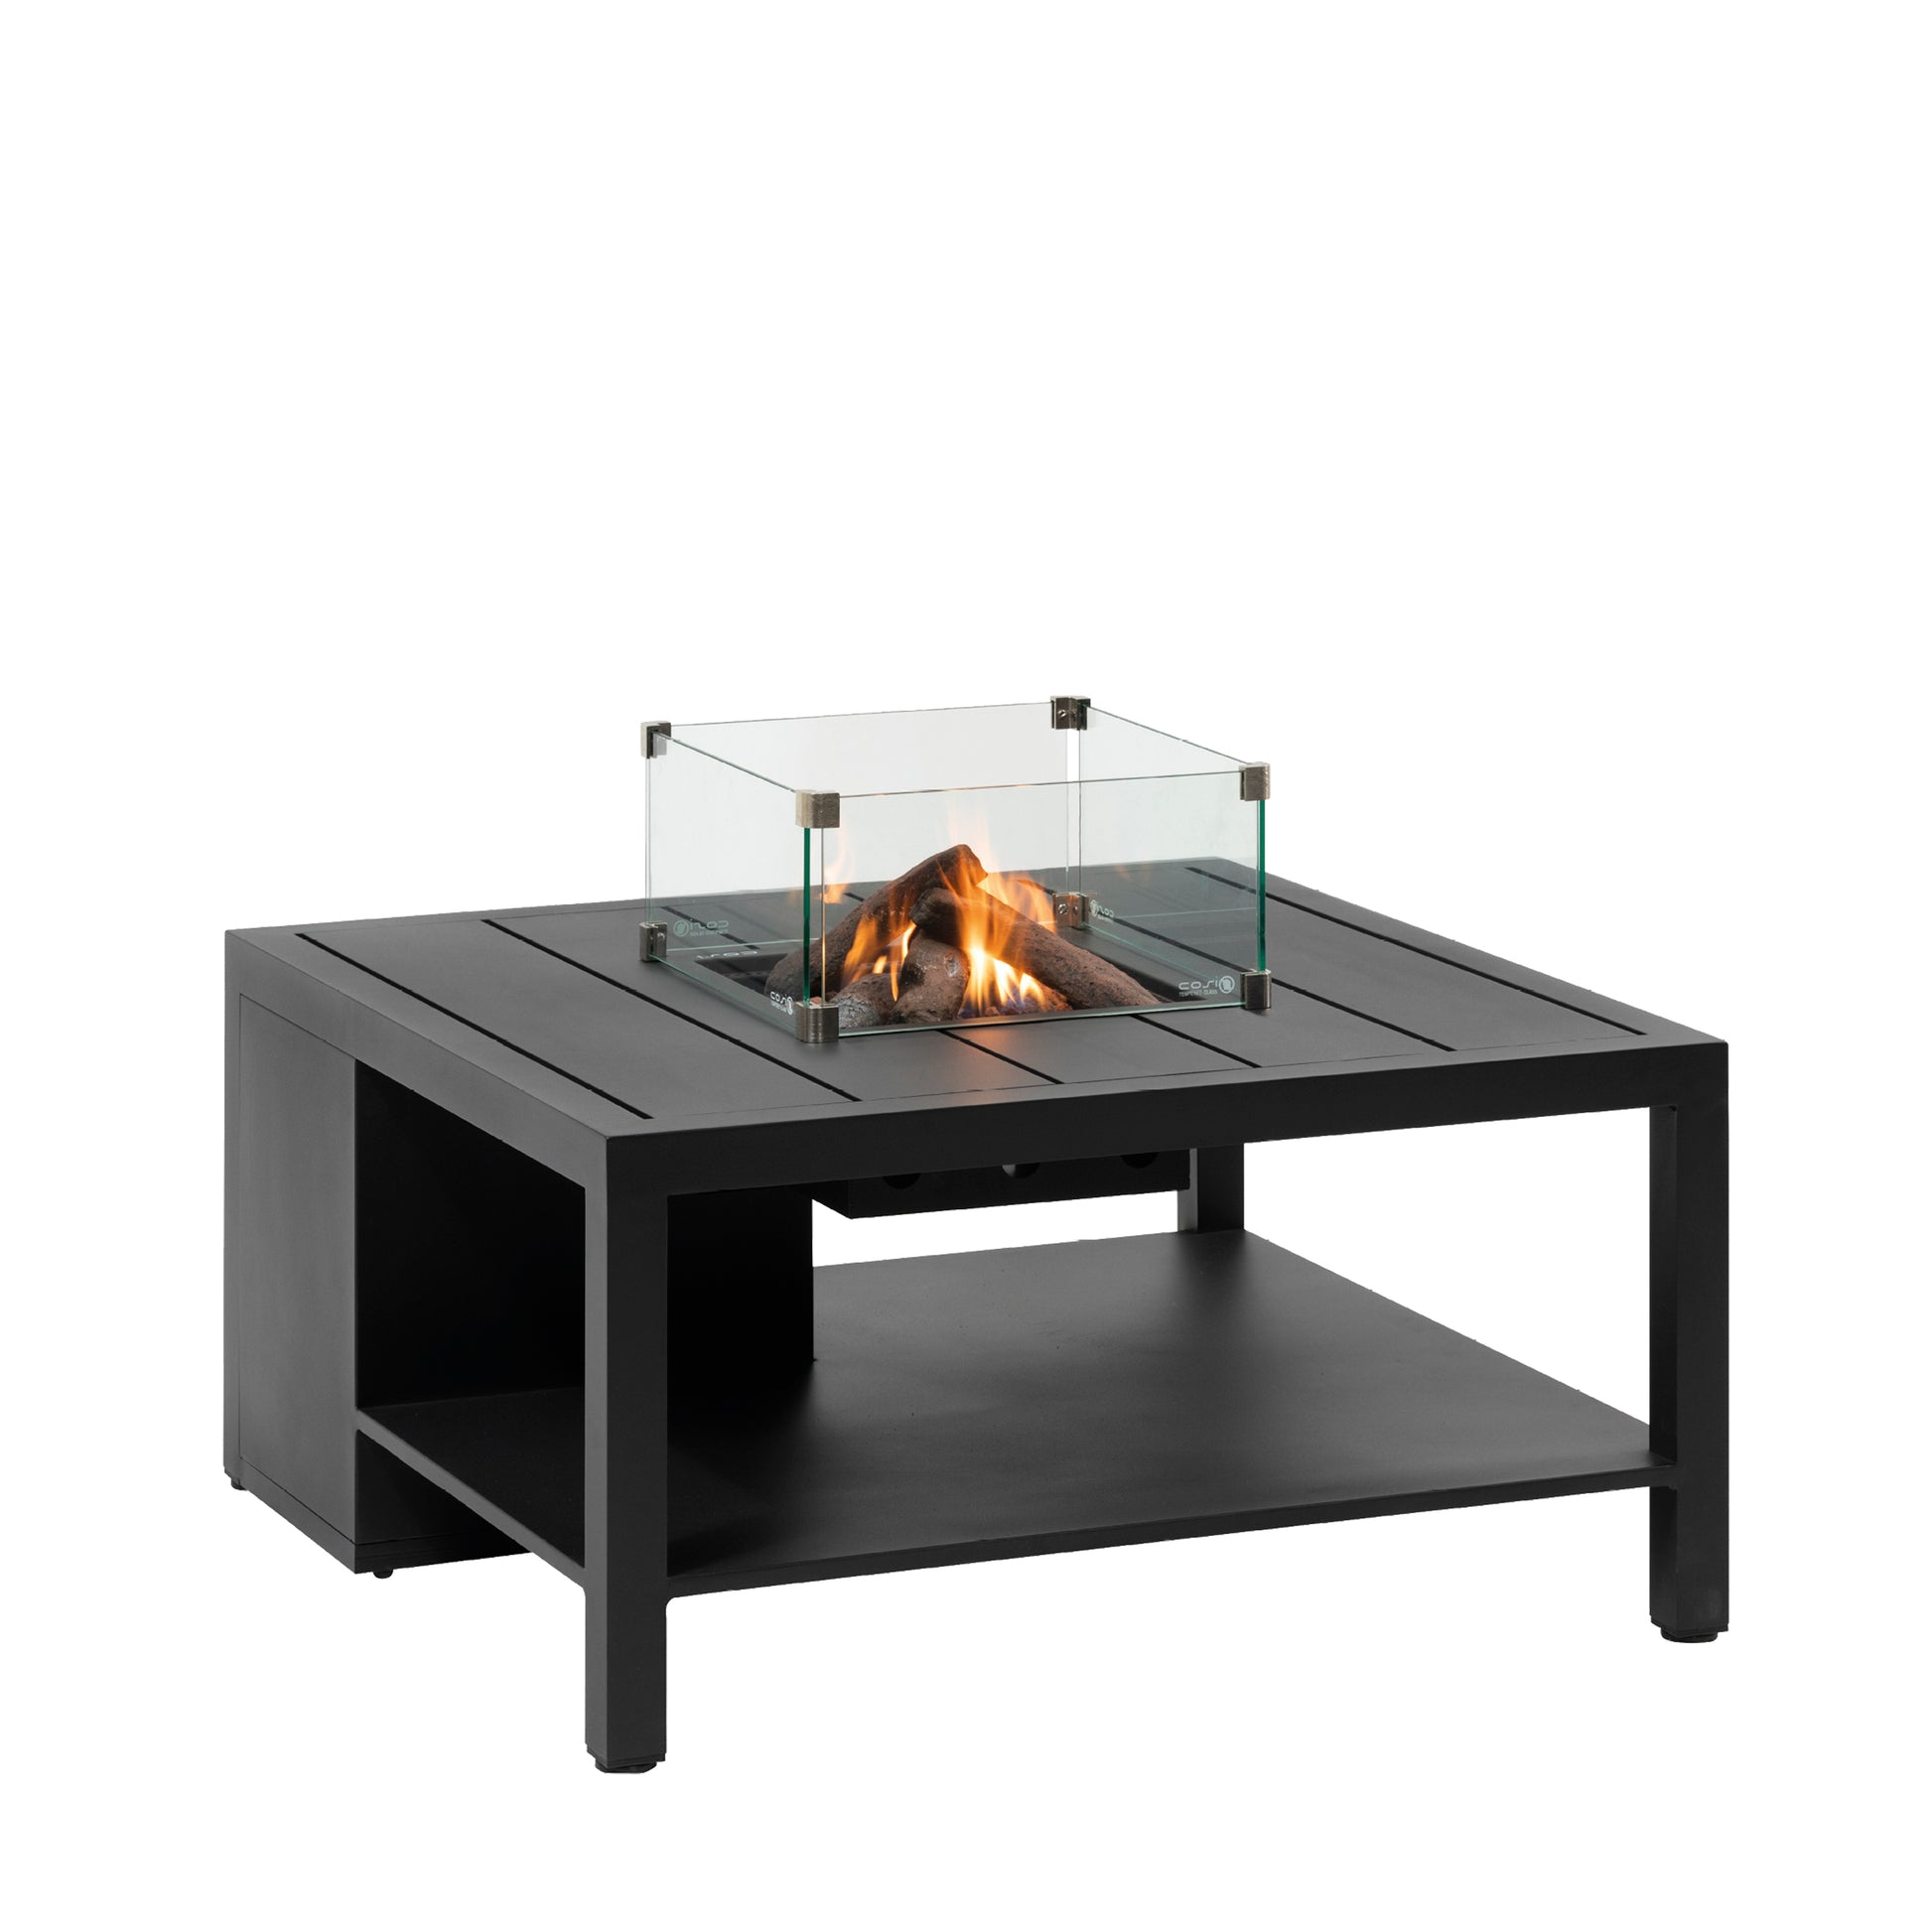 Cosi - Cosiflow 100 Square Anthracite Fire Pit Table - Timeout Gardens